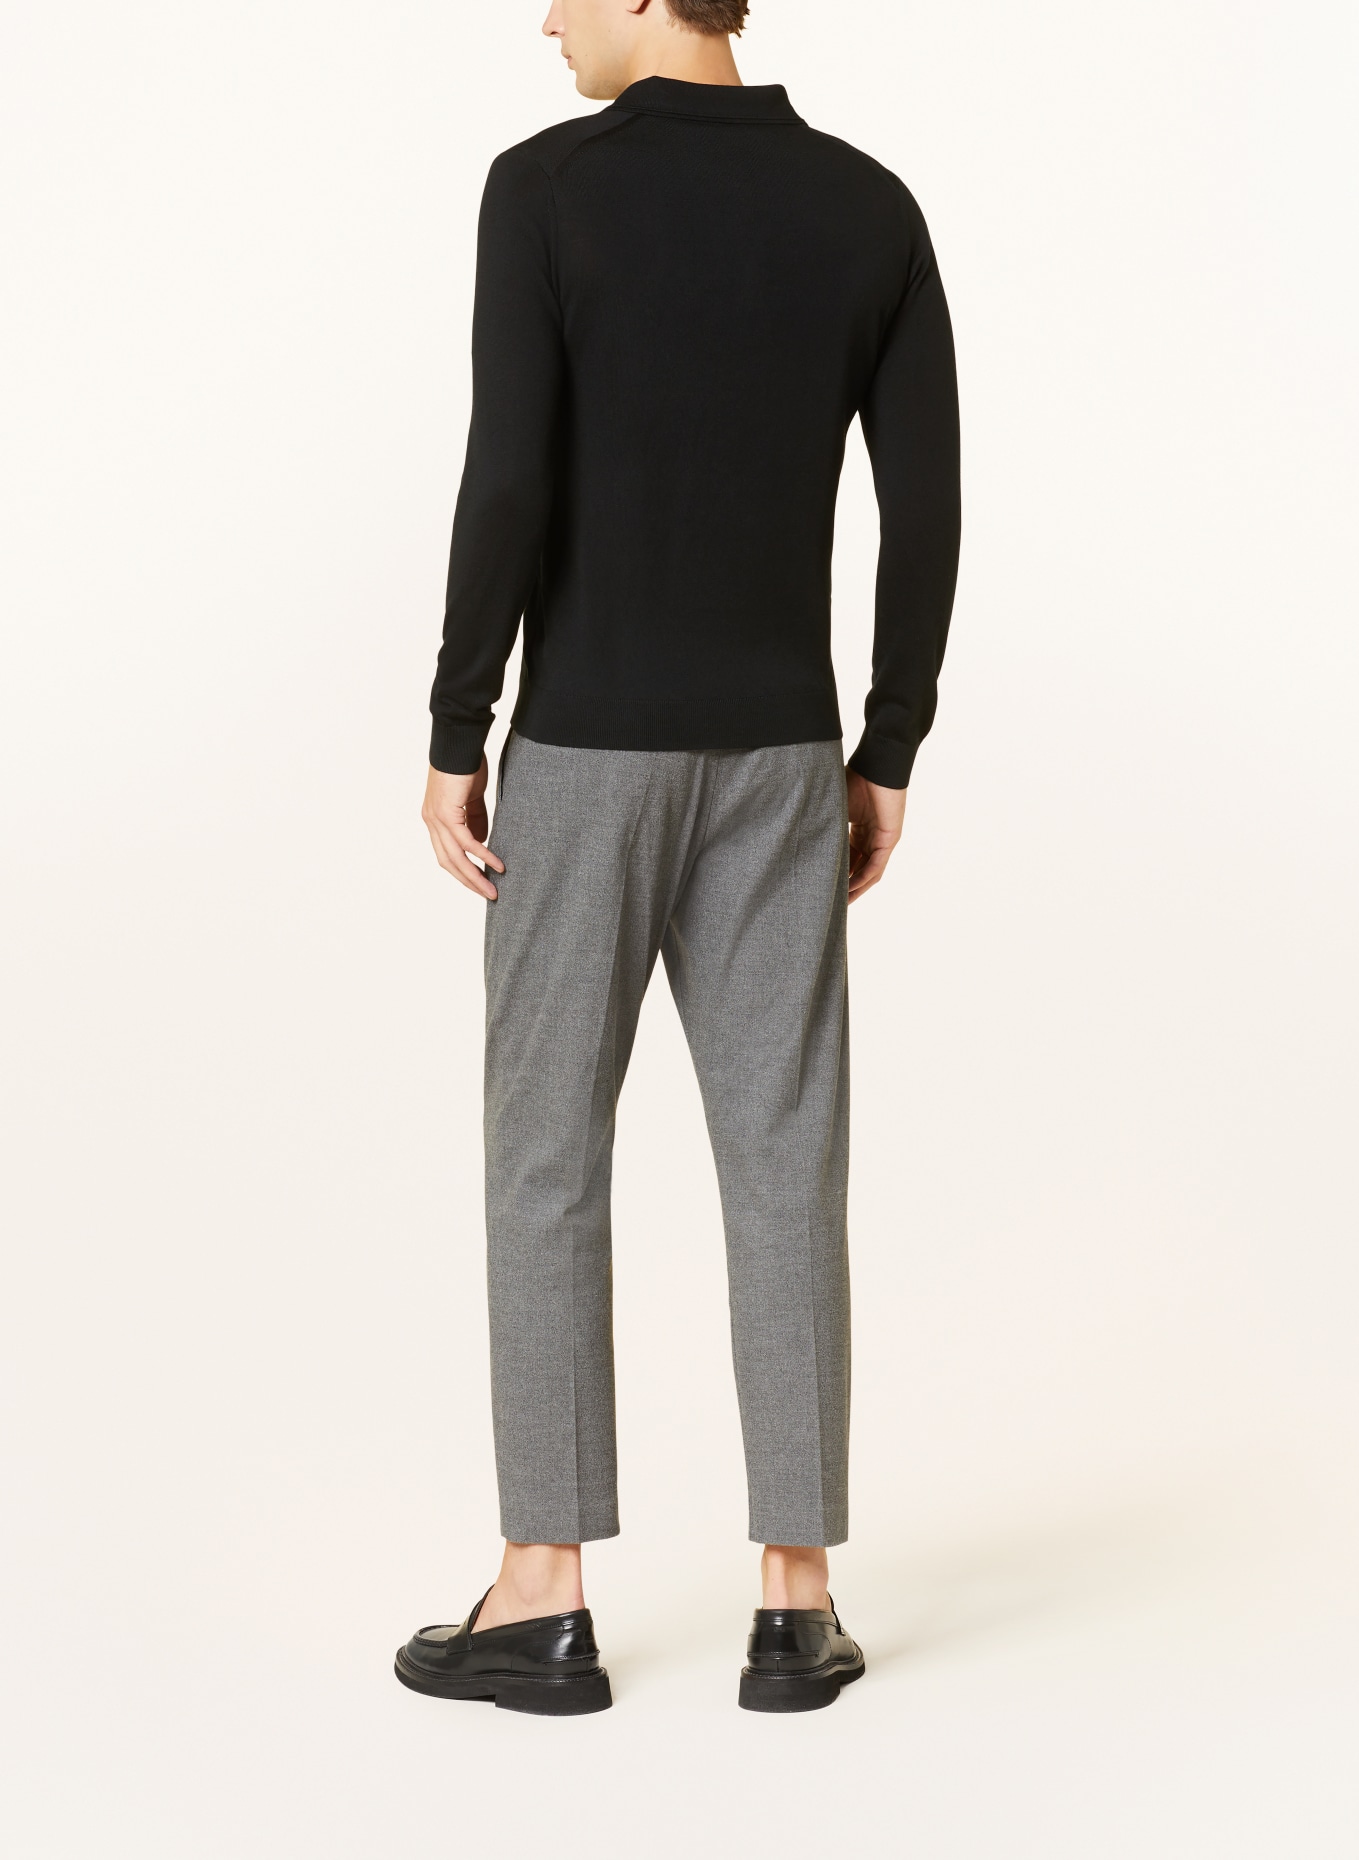 REISS Knitted polo shirt TRAFFORD made of merino wool, Color: BLACK (Image 3)